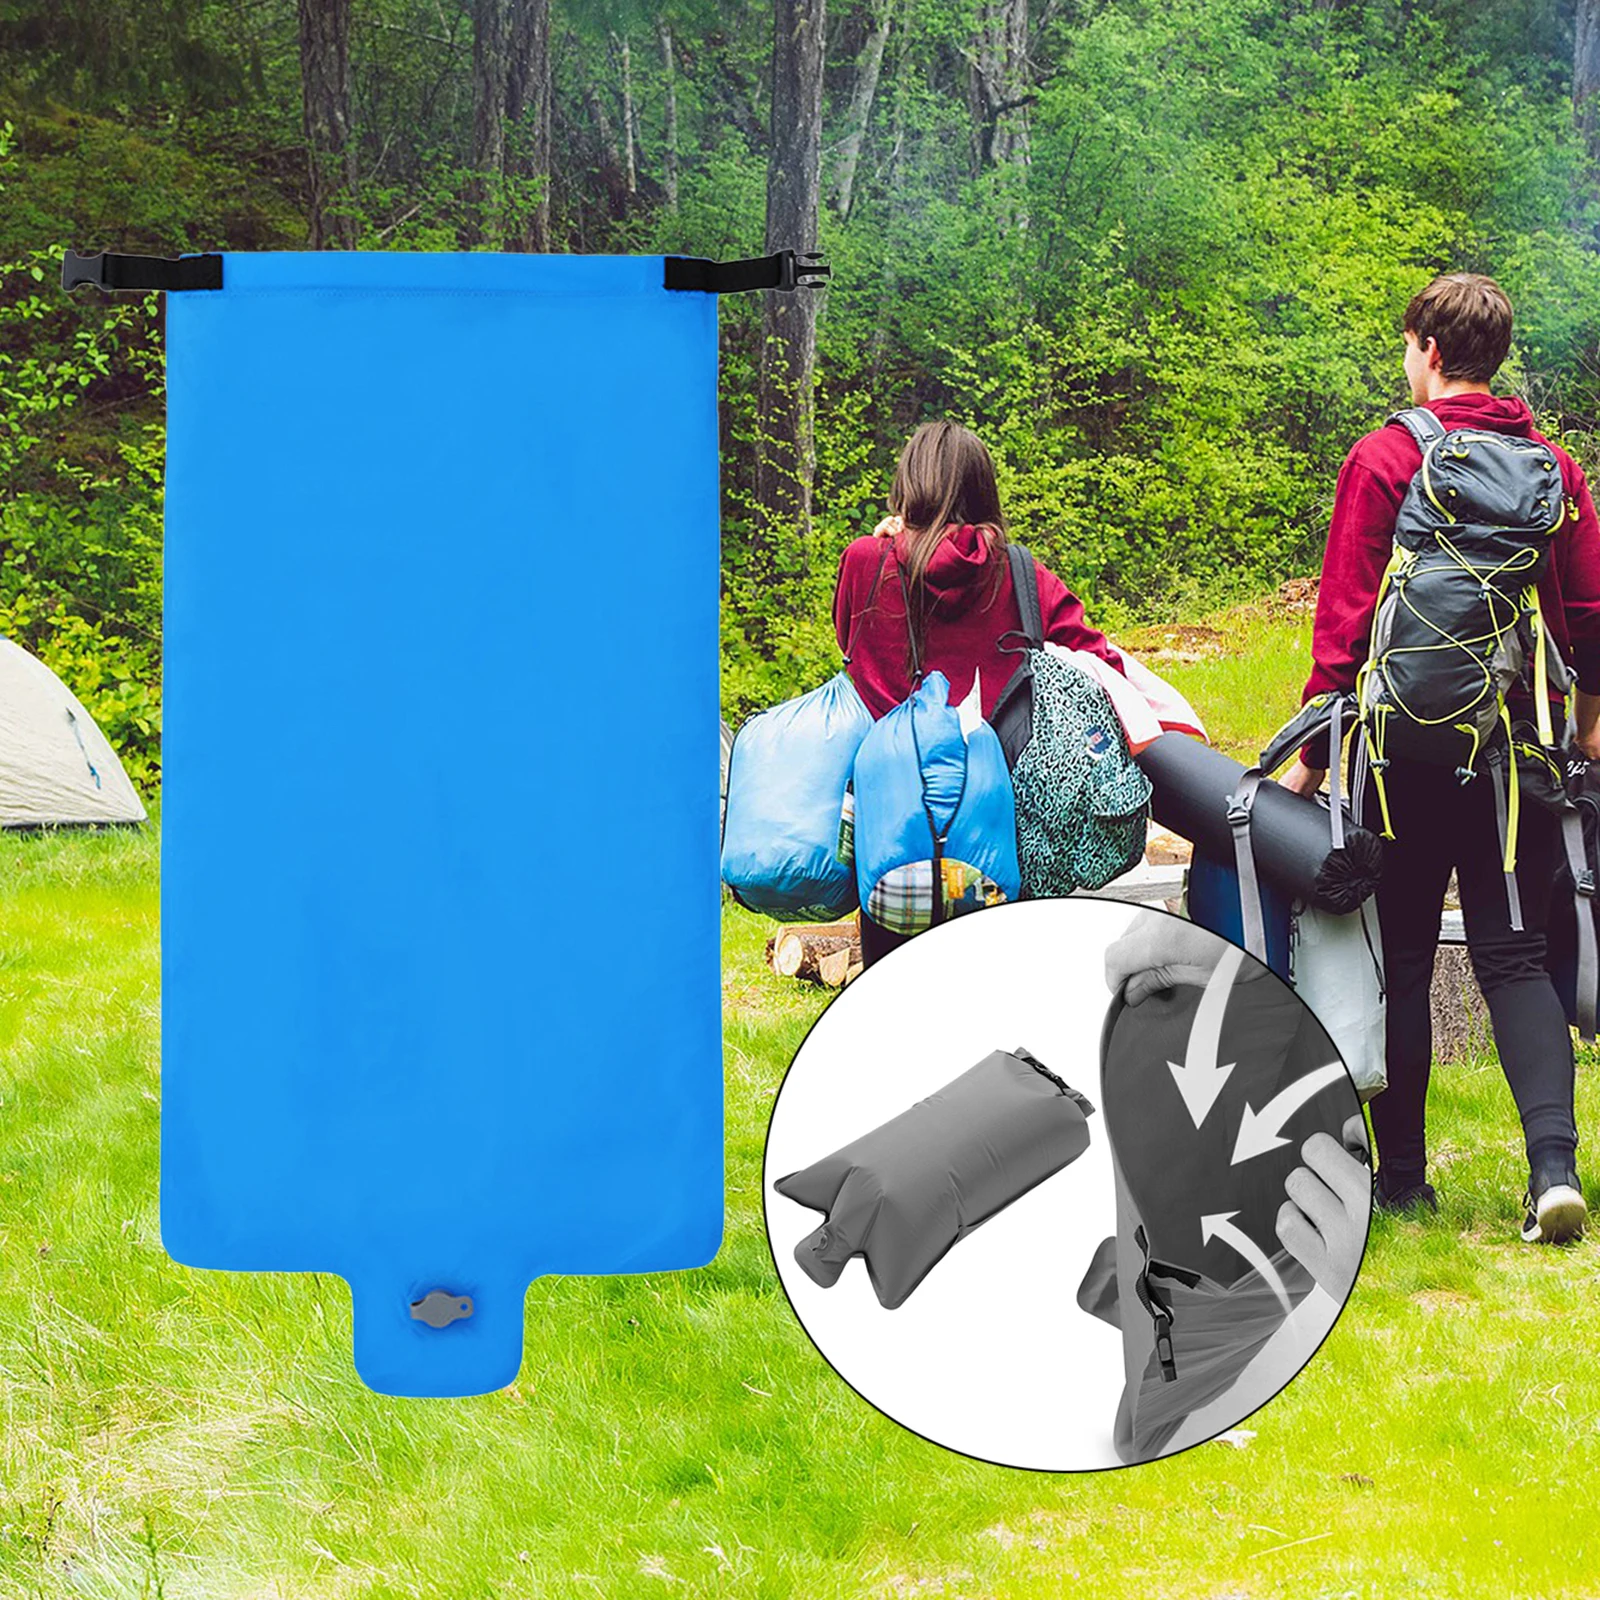 Premium Inflatable Sleeping Mat, Waterproof Camping Tent Mattress, Outdoor Hiking Backpacking Air Pad with Storage Bag